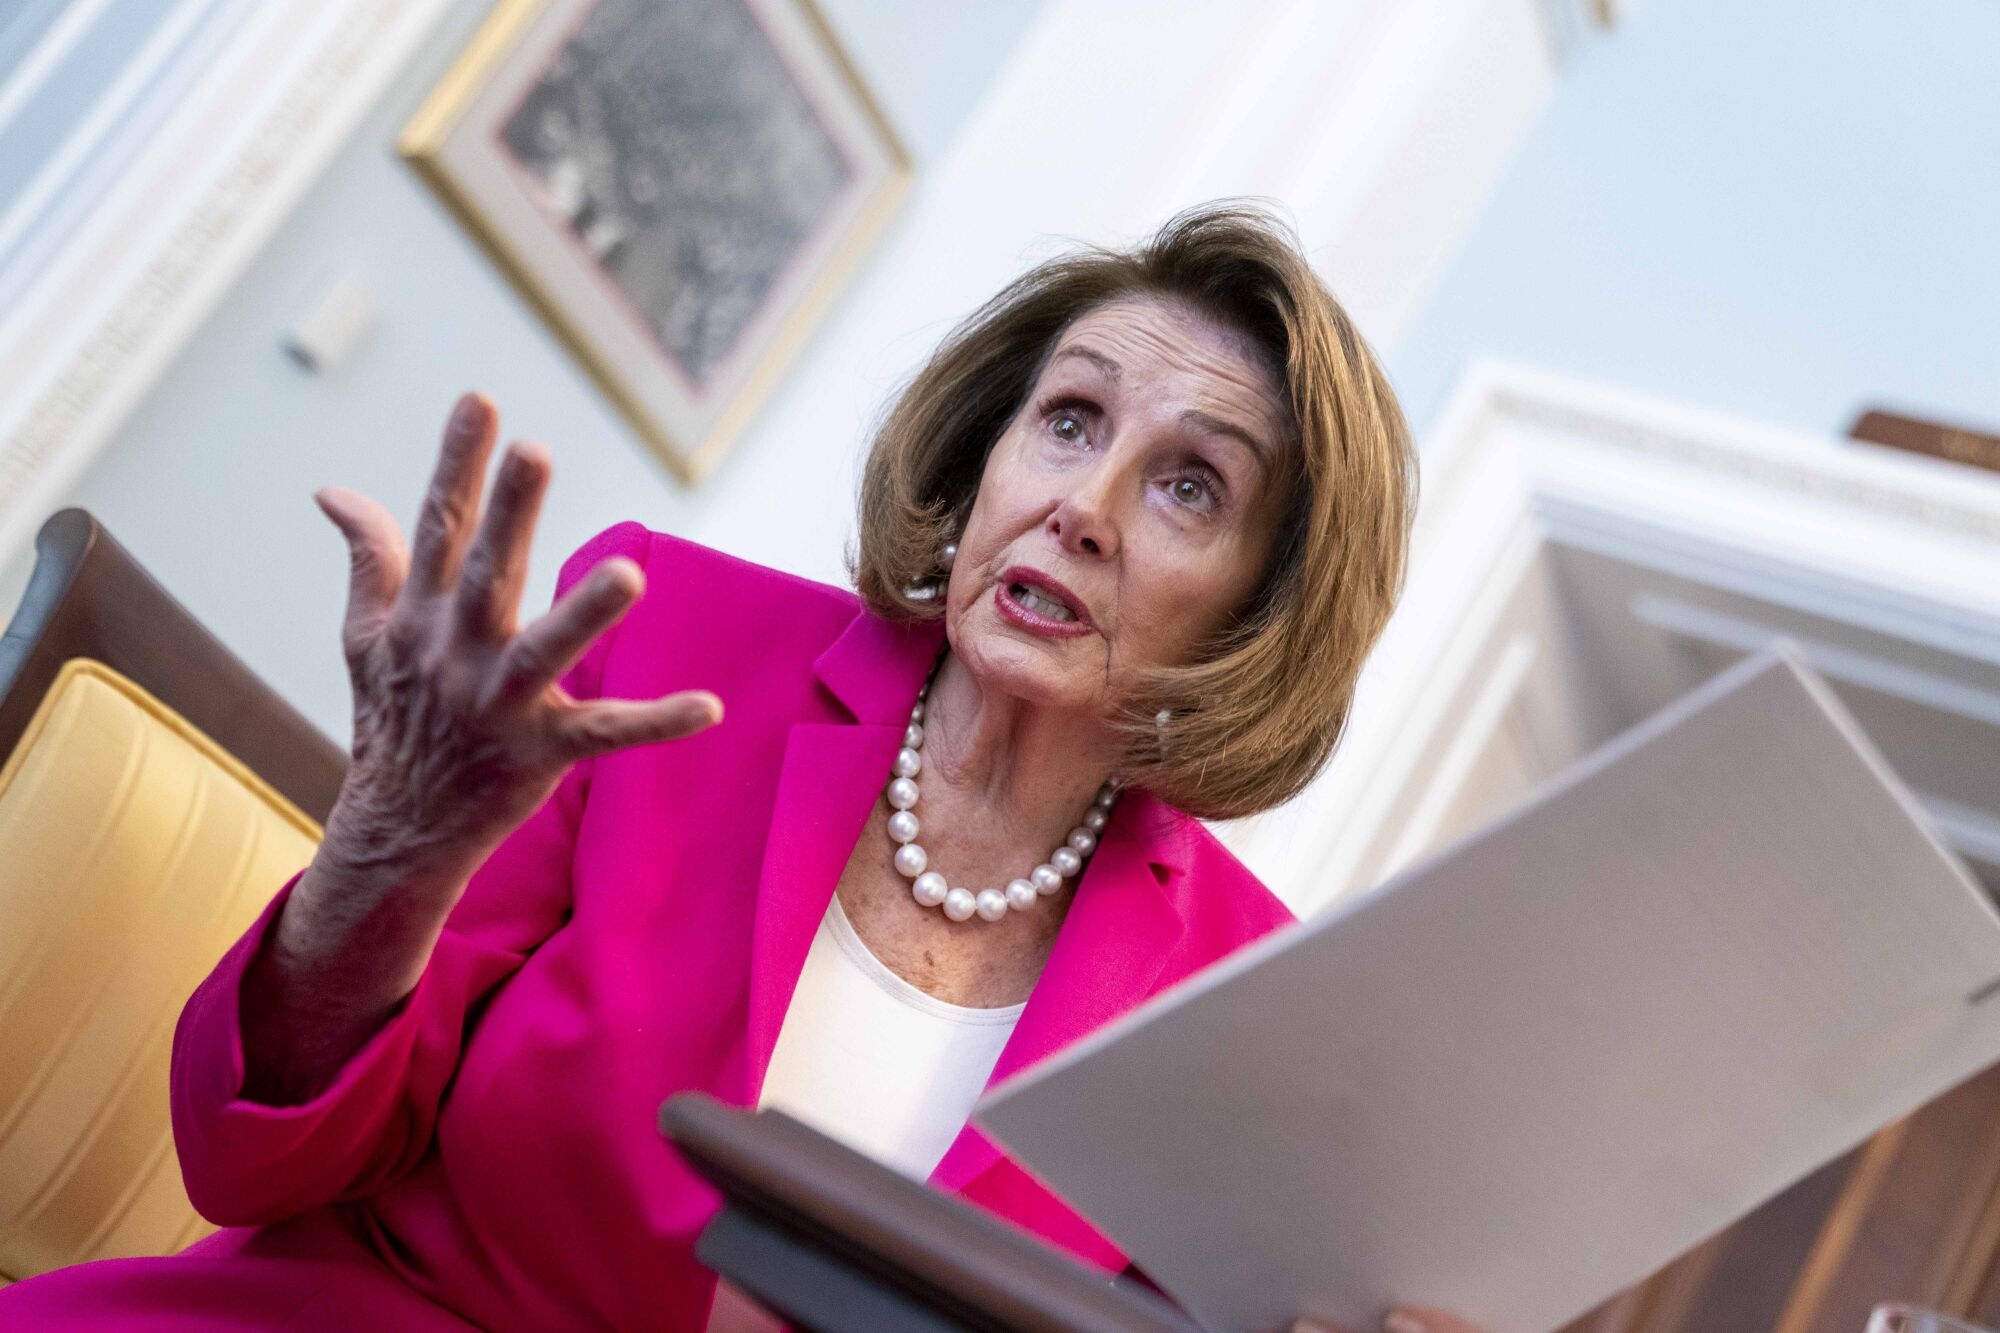 Nancy Pelosi reviews notes while speaking to another person off-camera